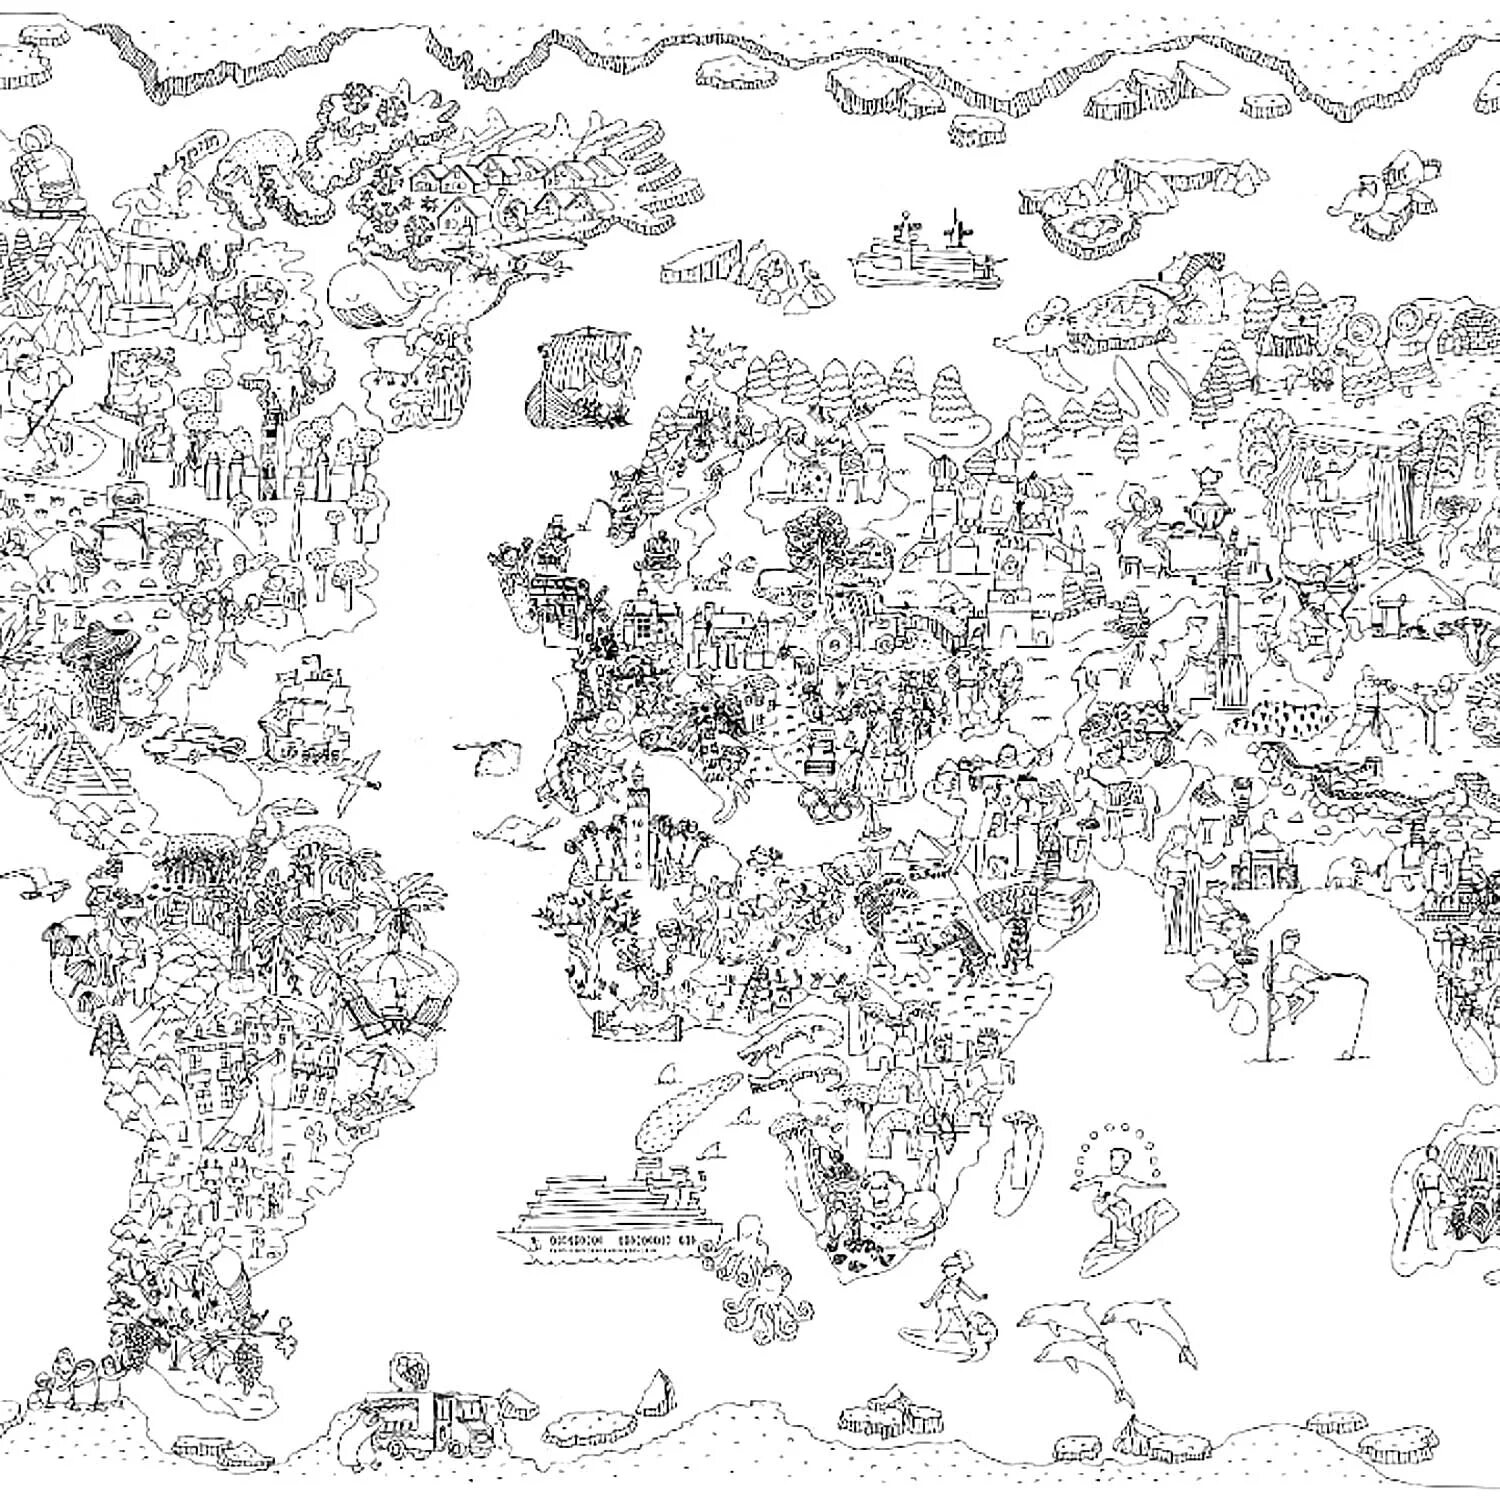 Awesome giant map of the world